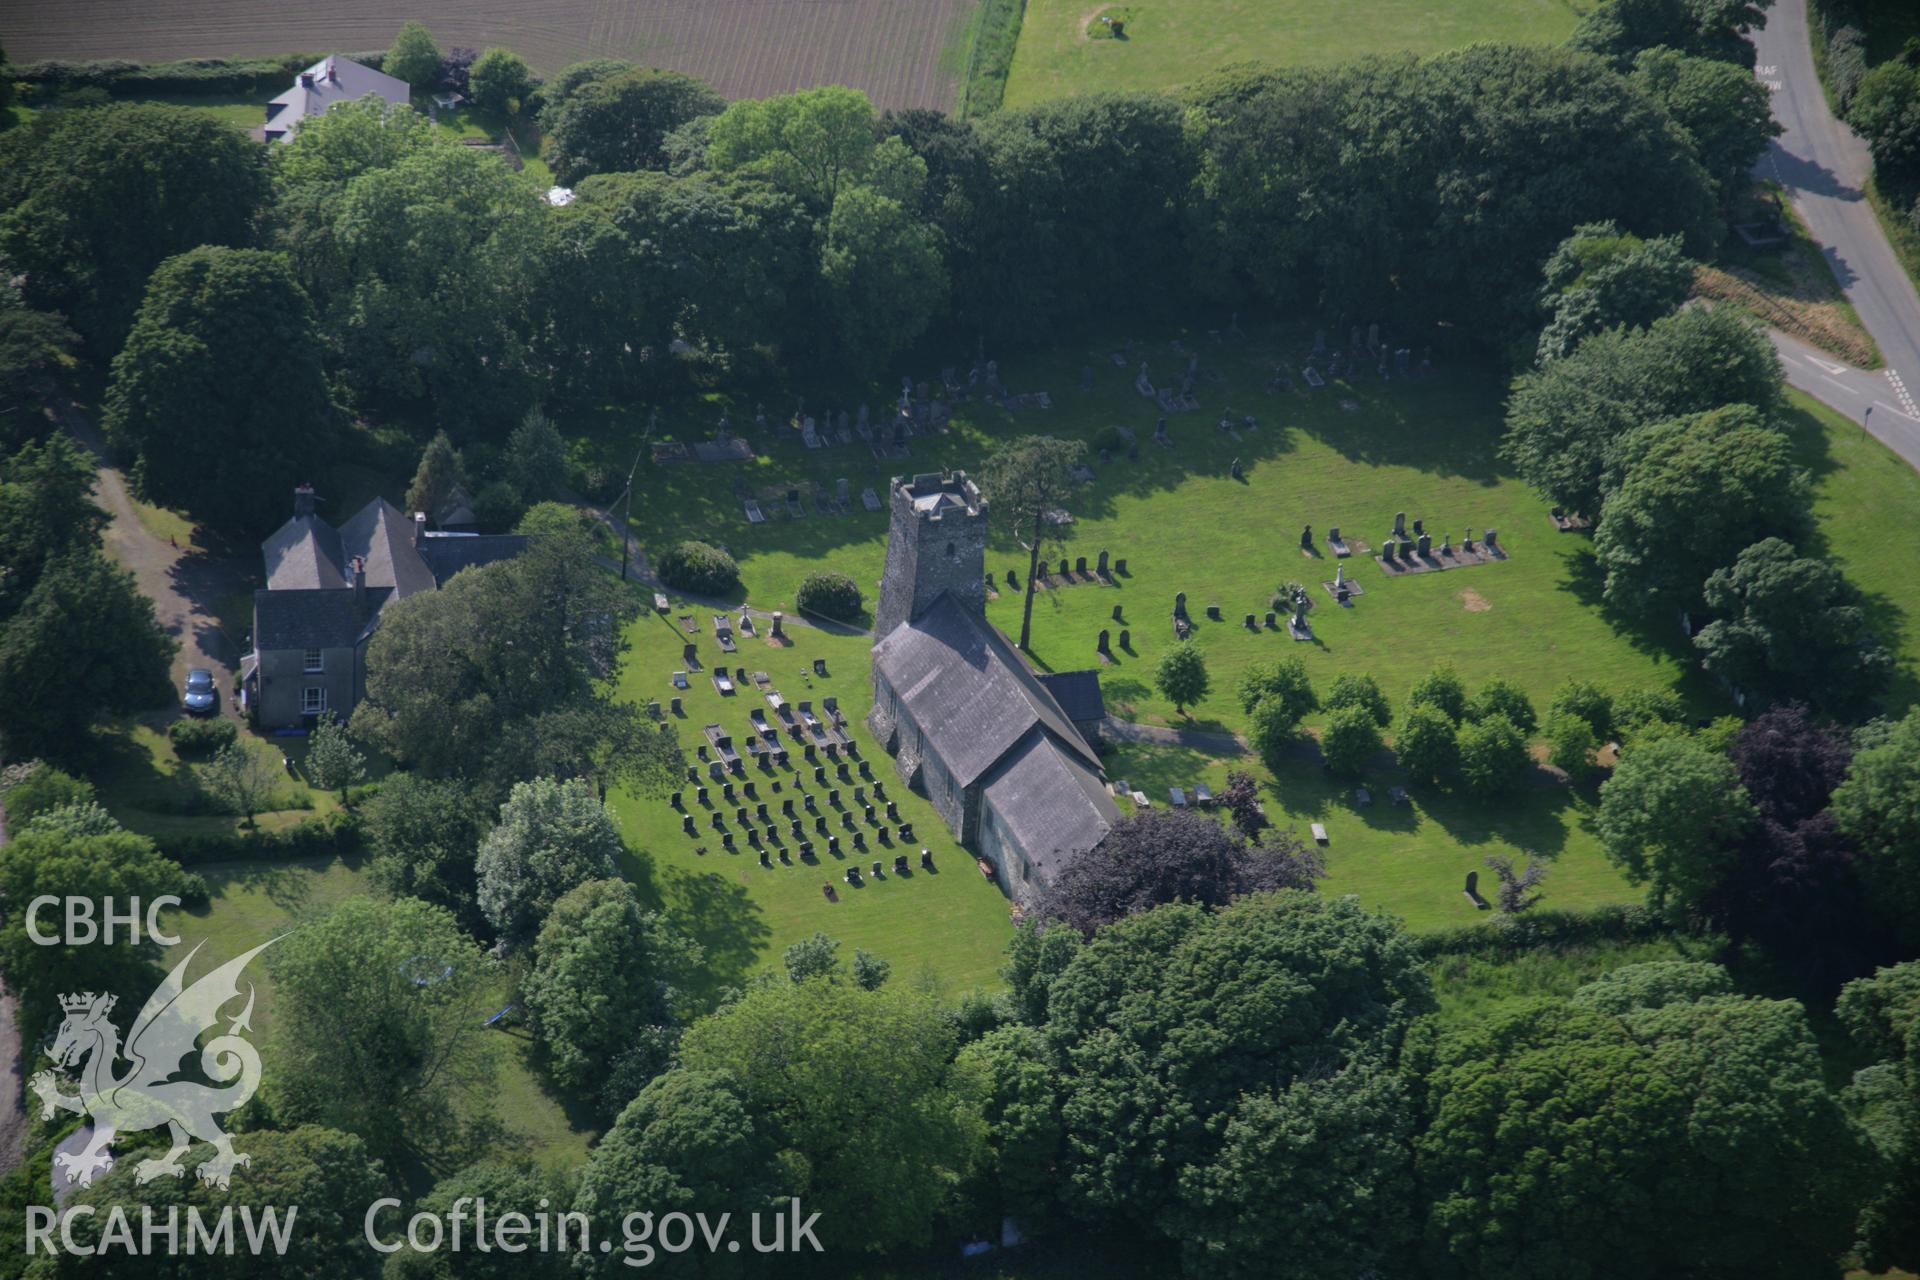 RCAHMW colour oblique aerial photograph of Wiston Parish Church from the east. Taken on 08 June 2006 by Toby Driver.